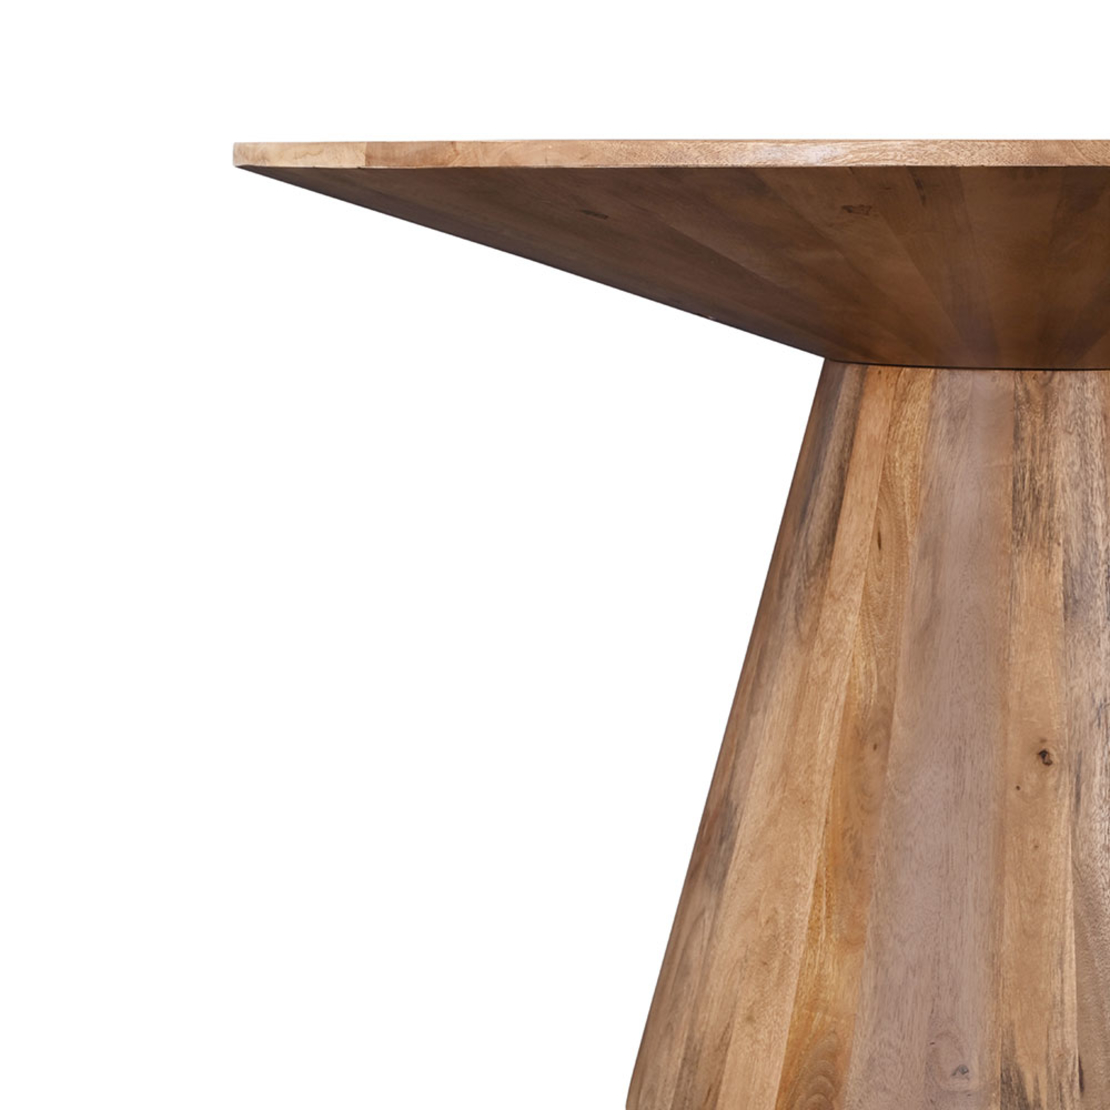 FALSO TABLE SOLID WOOD MANGO NATURAL IN